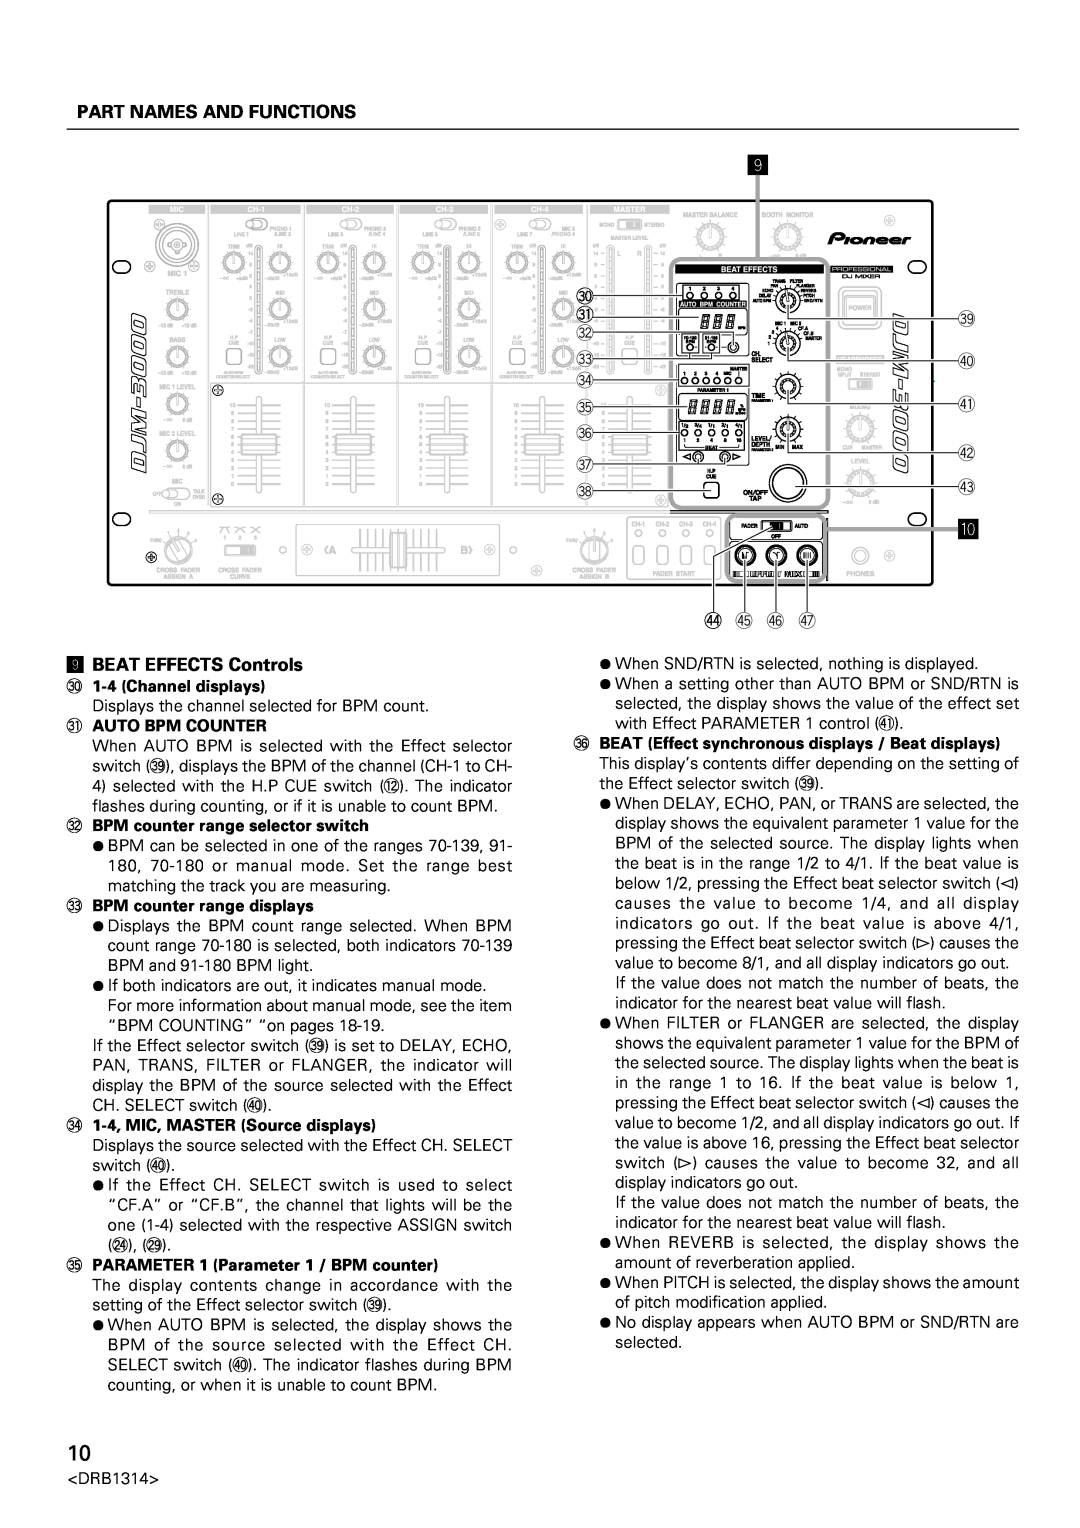 Plantronics DJM-3000 operating instructions « BEAT EFFECTS Controls, Part Names And Functions 